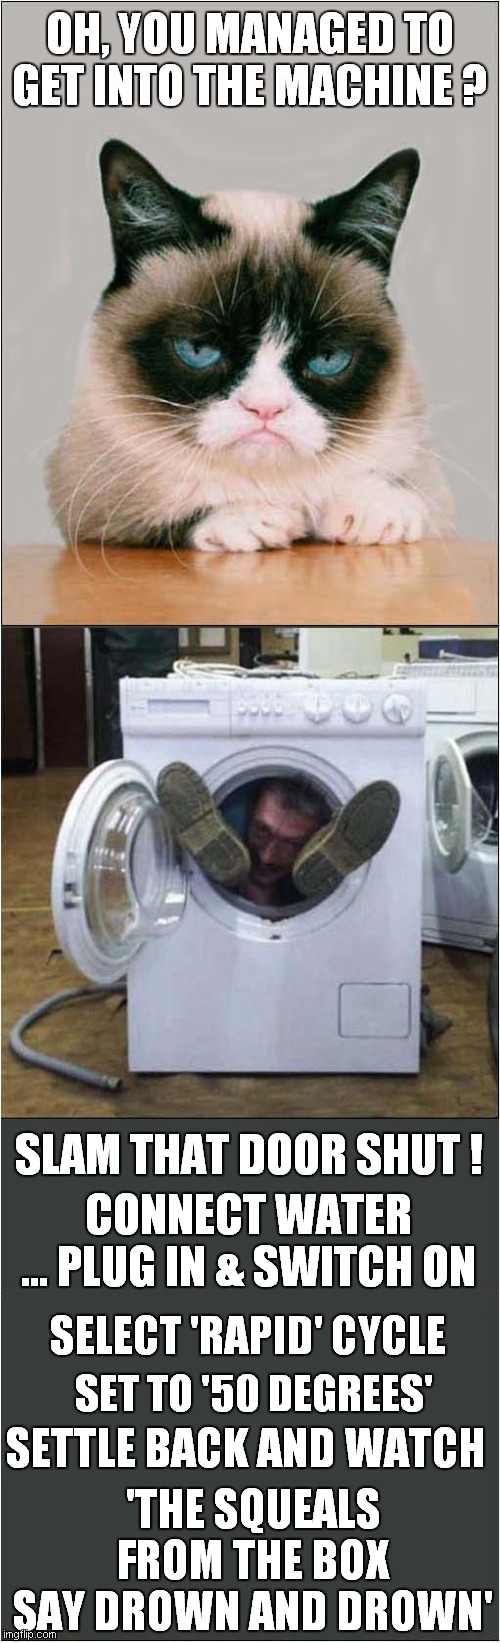 Grumpy Vs Contortionist | OH, YOU MANAGED TO GET INTO THE MACHINE ? SLAM THAT DOOR SHUT ! CONNECT WATER ... PLUG IN & SWITCH ON; SELECT 'RAPID' CYCLE; SET TO '50 DEGREES'; SETTLE BACK AND WATCH; 'THE SQUEALS FROM THE BOX
SAY DROWN AND DROWN' | image tagged in grumpy cat,washing machine,contortionist | made w/ Imgflip meme maker